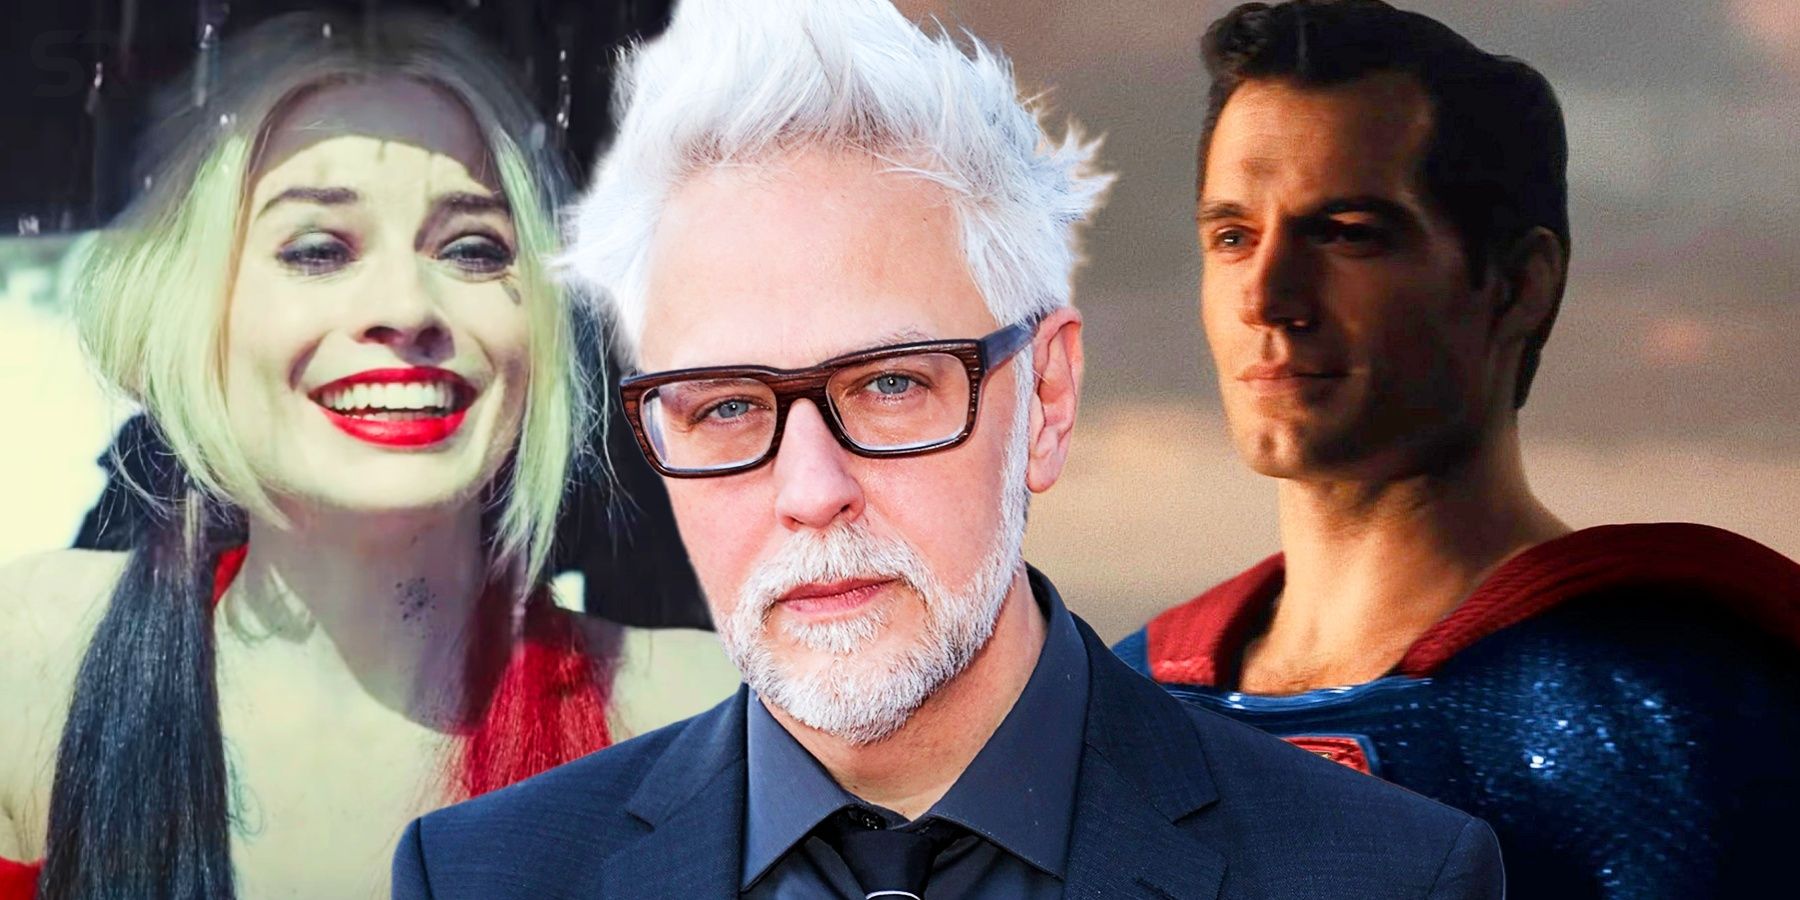 DC Universe: What James Gunn's new Justice League cast could look like